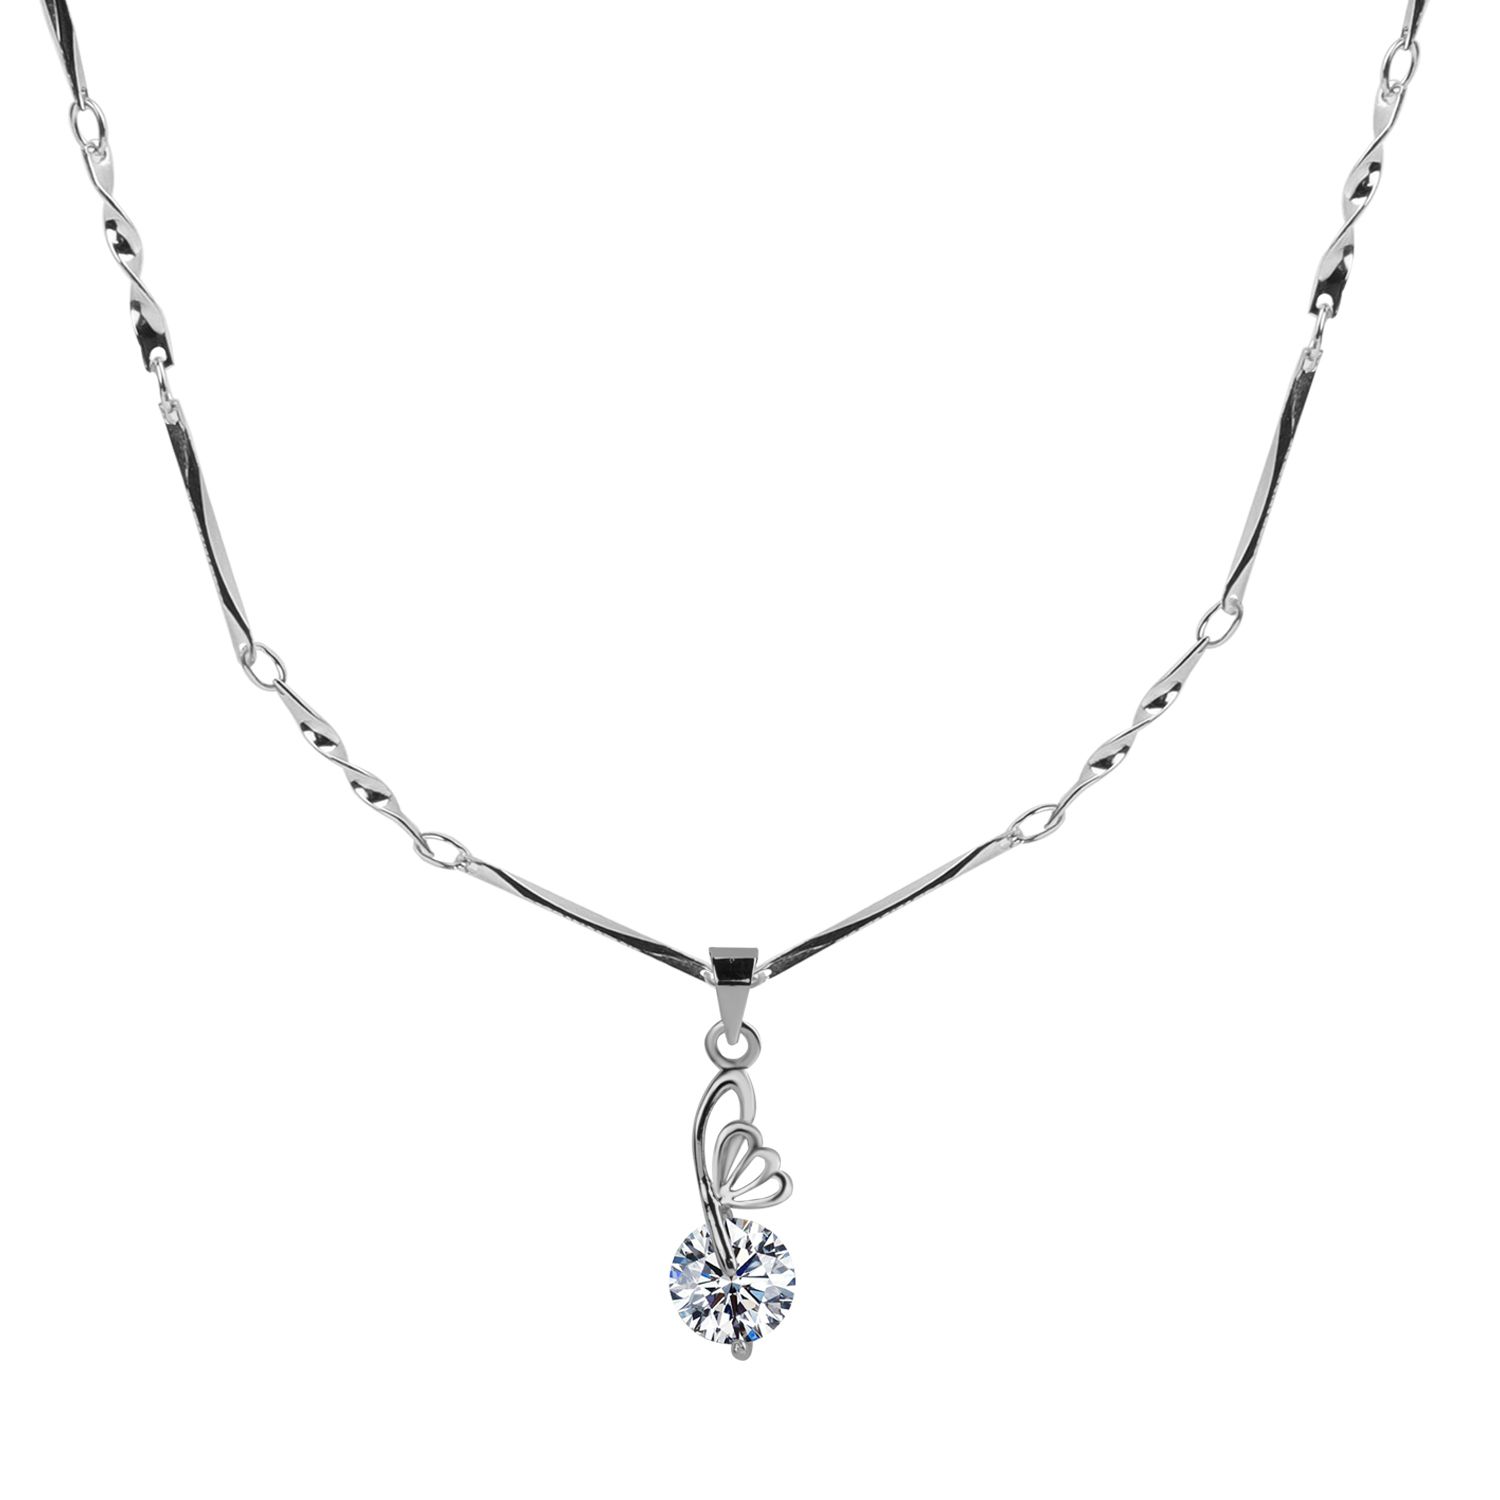     			Silver Plated Chian With Delicate Butterfly With Soliter  Diamond Pendant  For Women